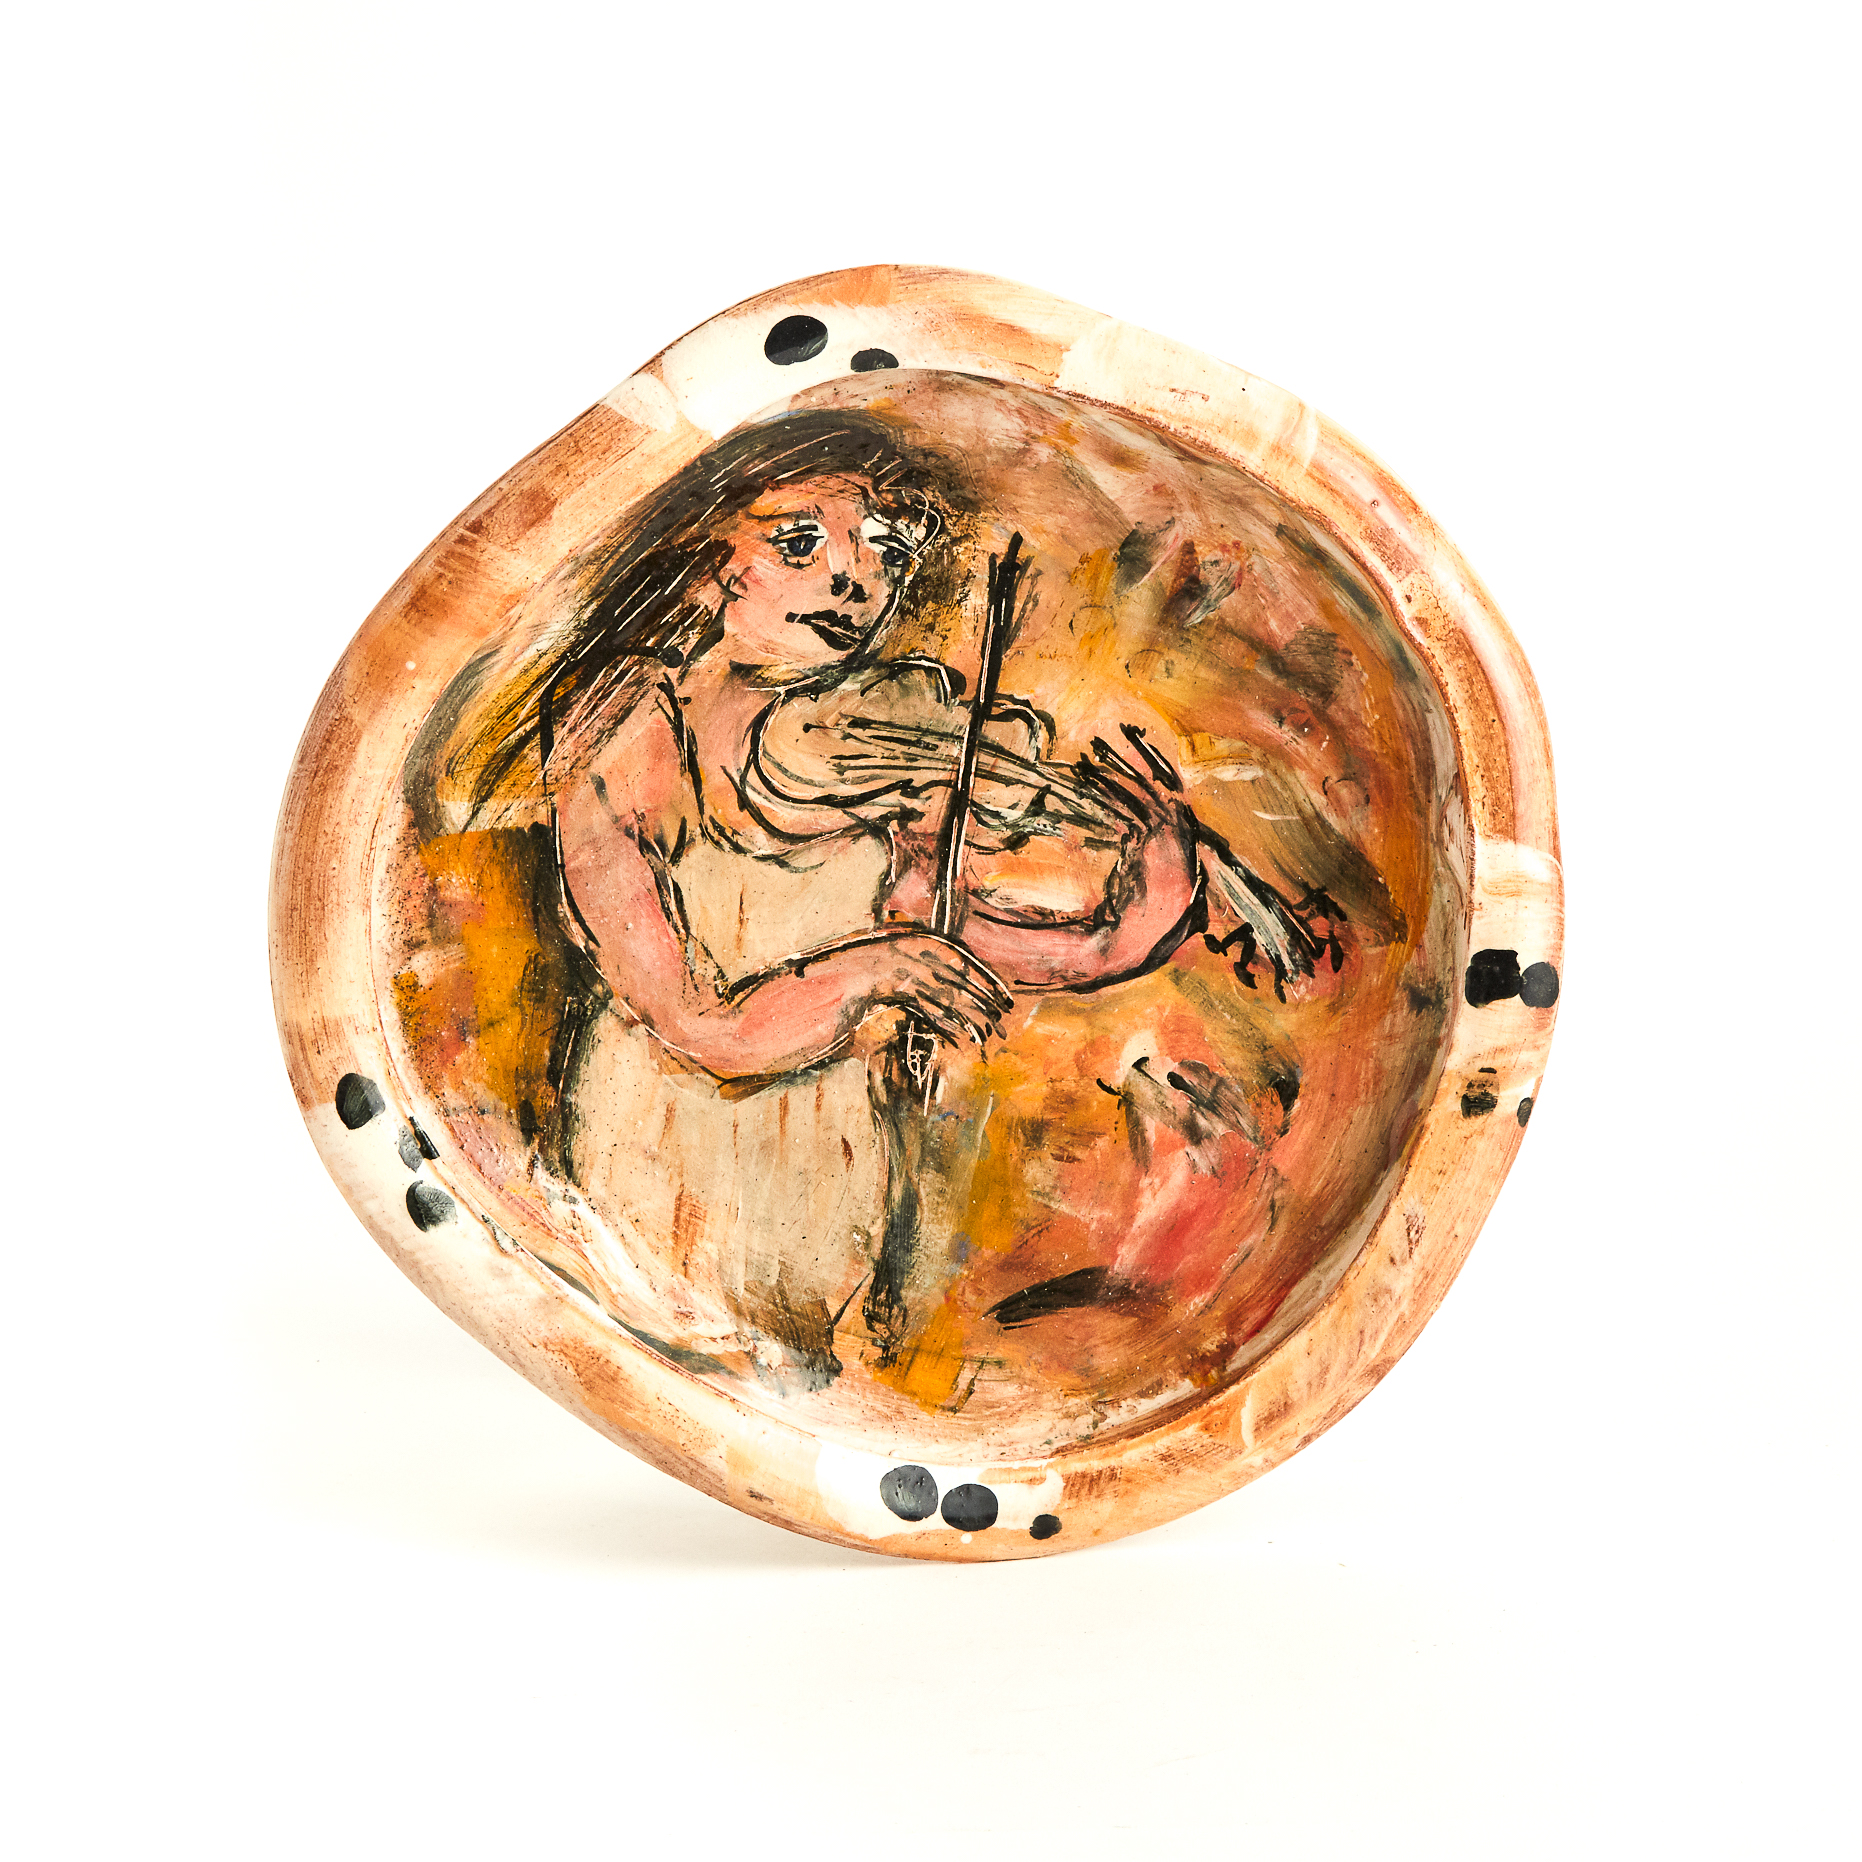 Ron Meyers (American, b.1934), Glazed Earthenware Dish with Violinist, c.2010